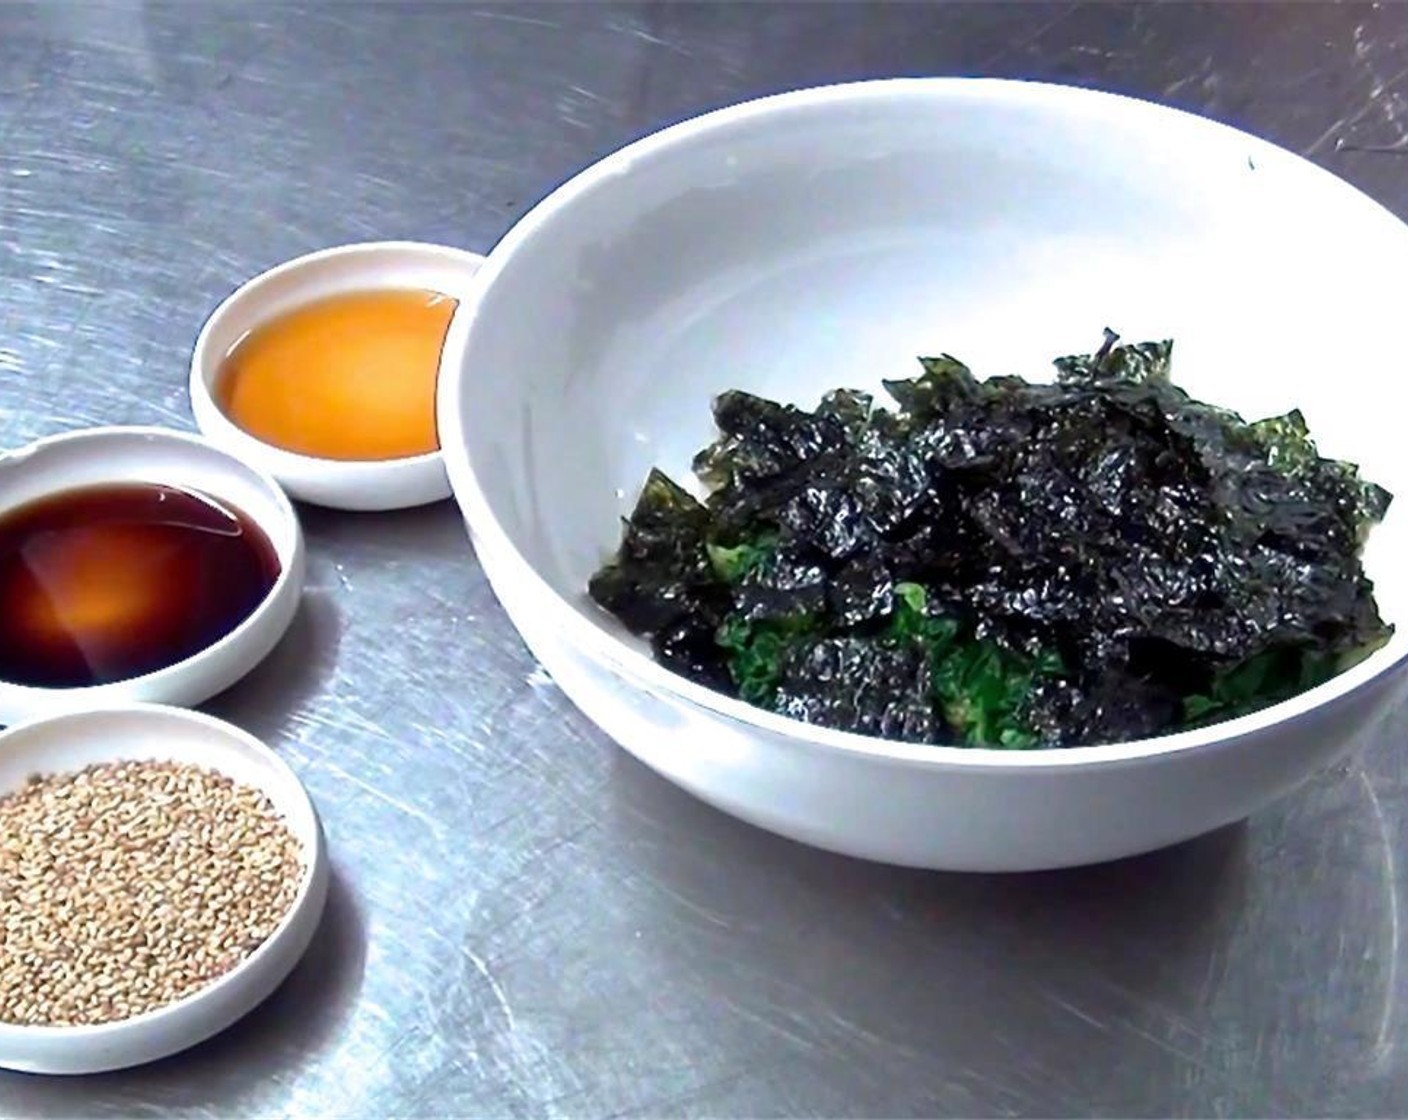 step 5 Add Soy Sauce (1 Tbsp), Sesame Seeds (1 Tbsp) and Sesame Oil (1 Tbsp) to the spinach, and mix well.